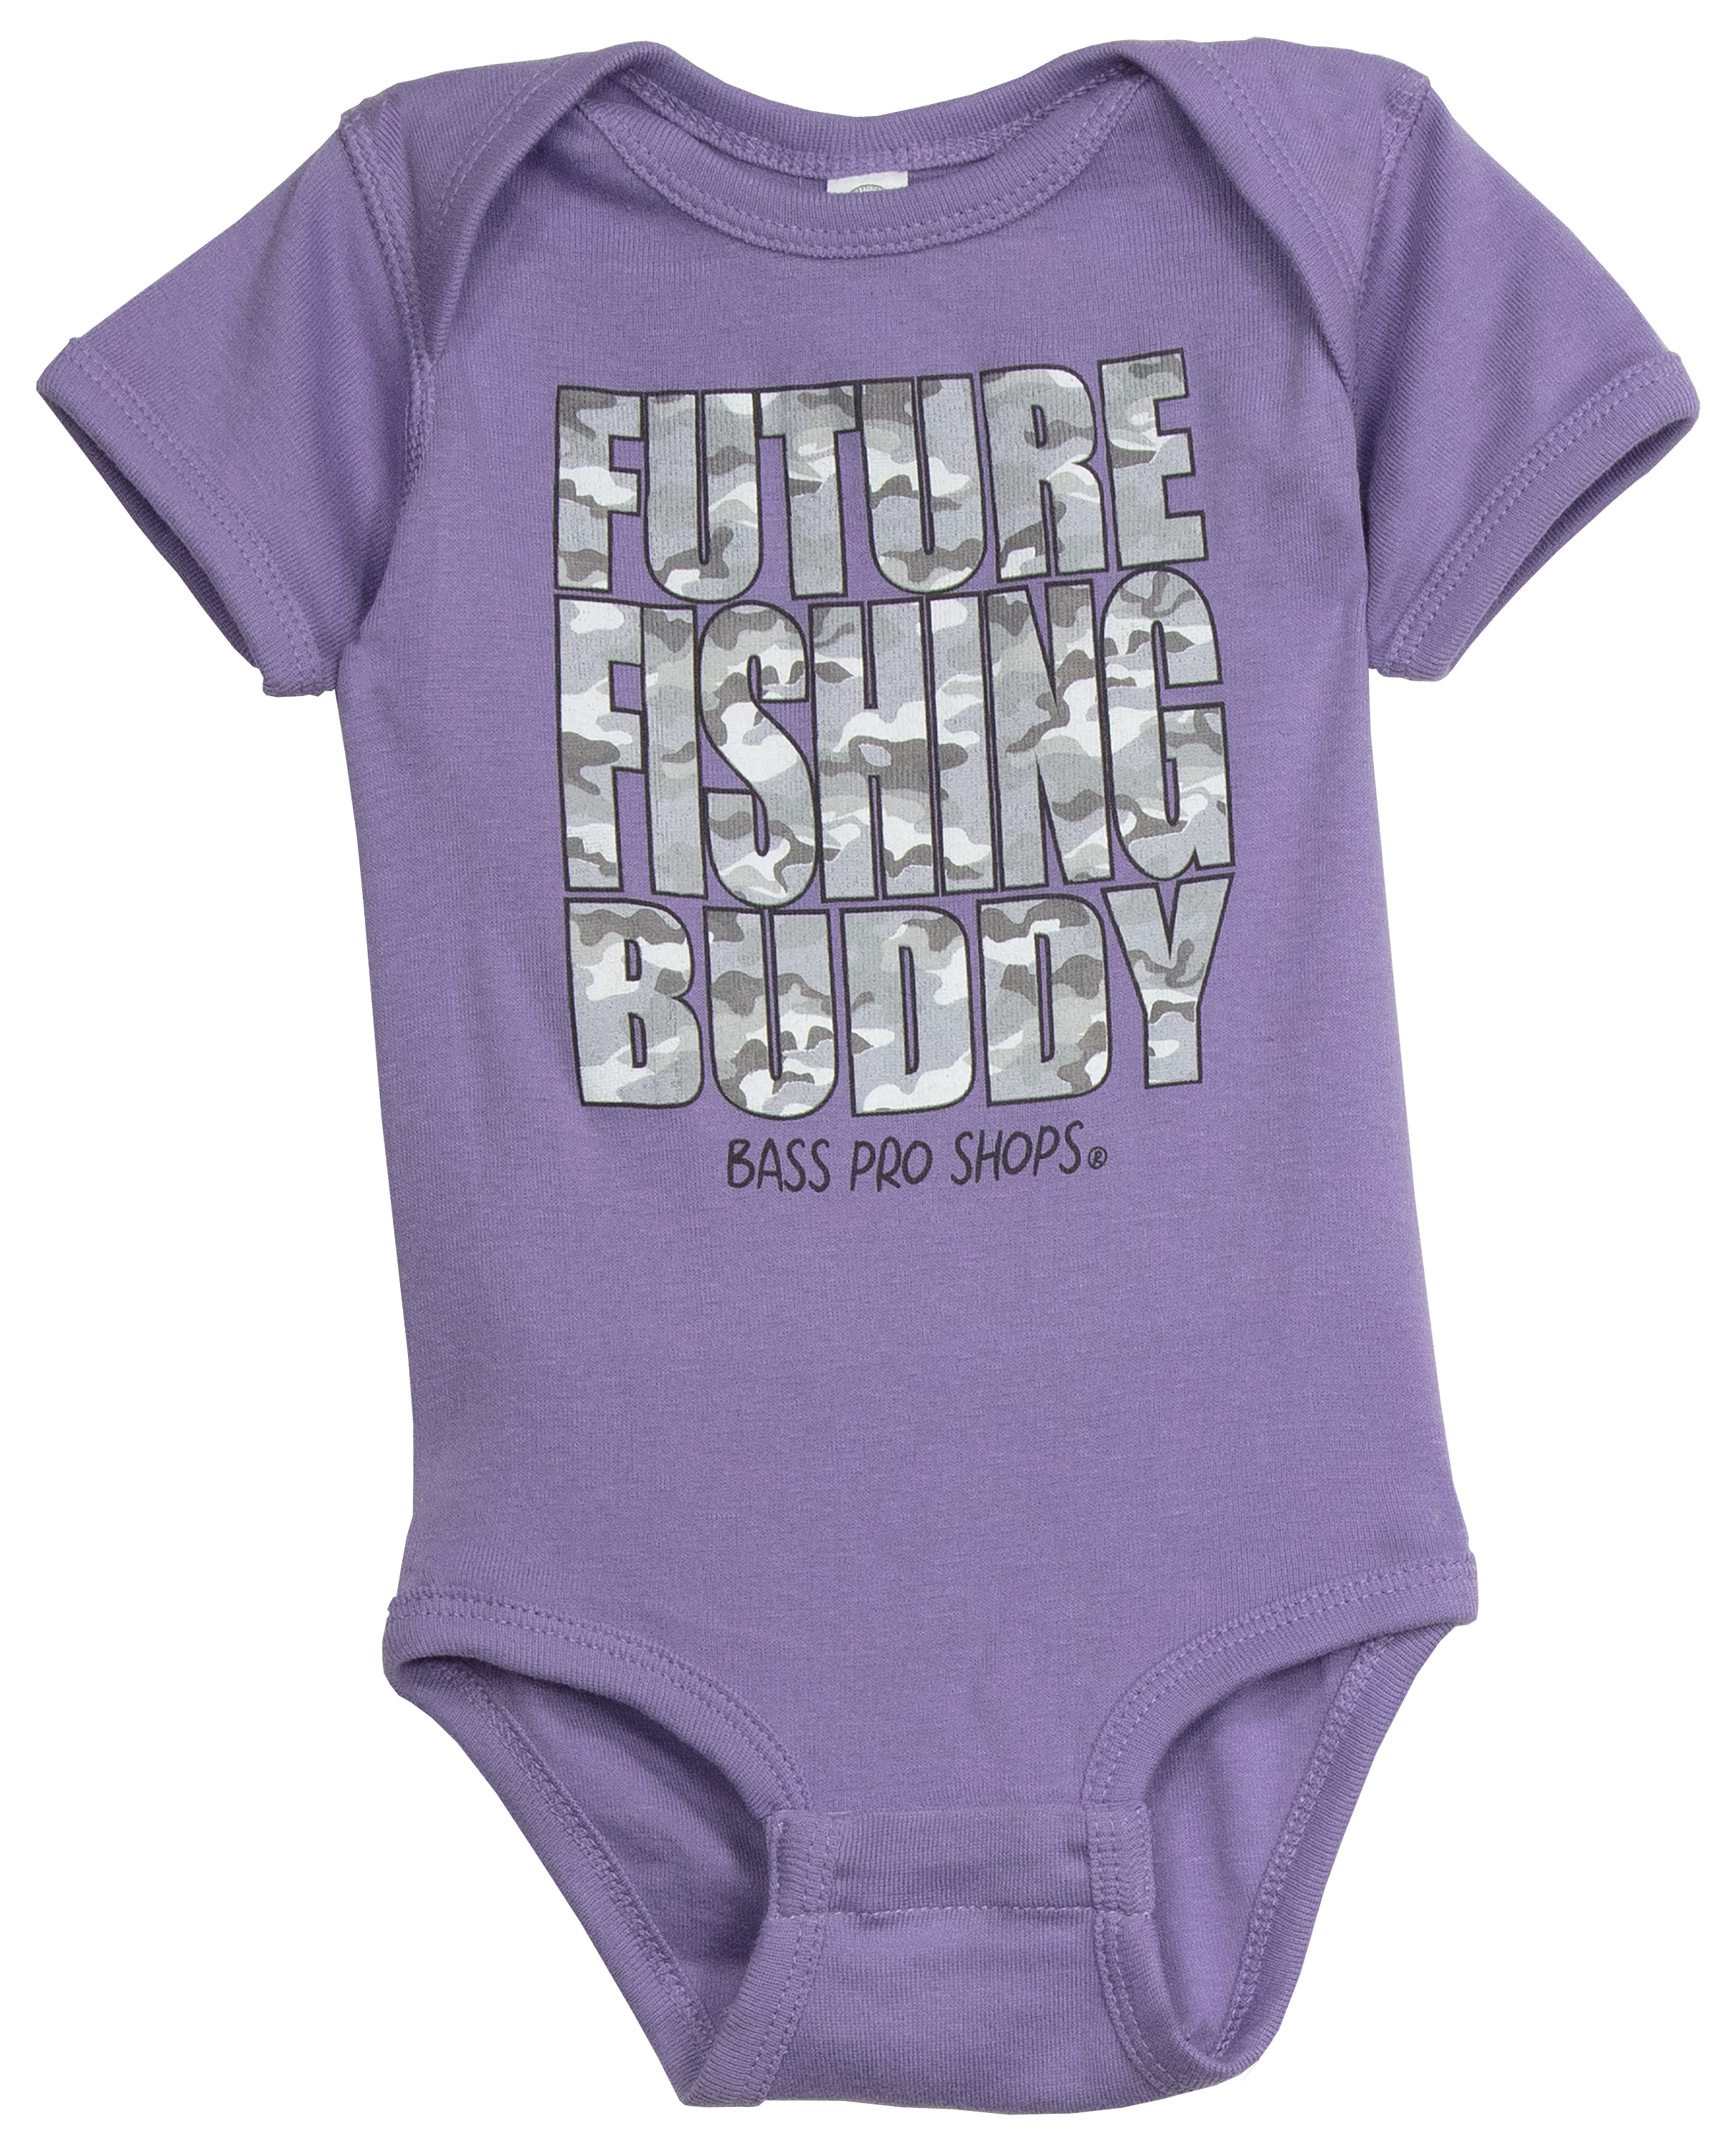 Daddy's Fishing Buddy Onesie® in Pink , Daddy's Girl Fishing Buddy Bodysuit  , Fishing Onesie® , Girl's Fishing Onesie® for Baby